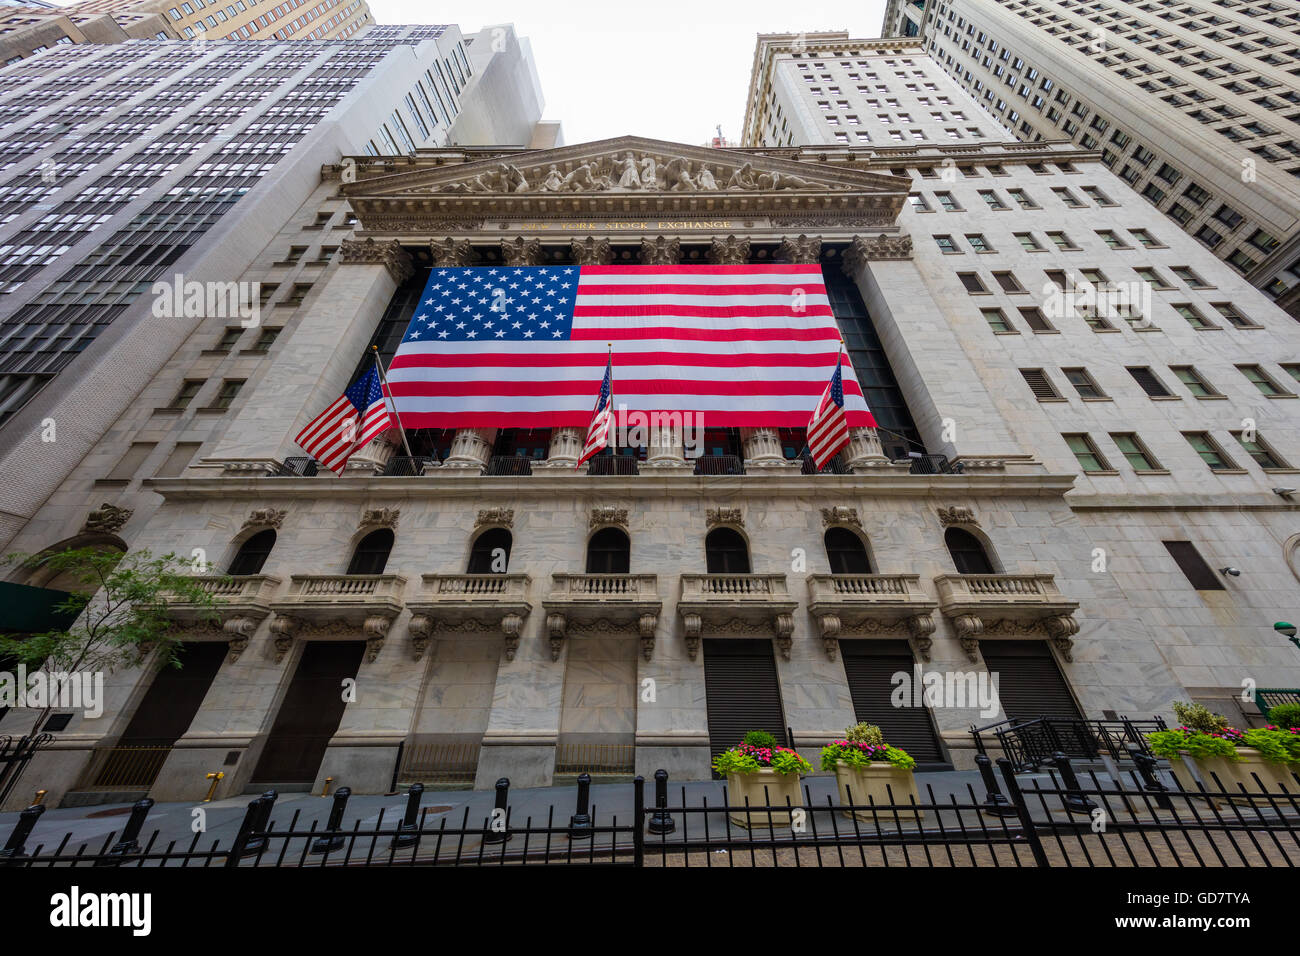 The New York Stock Exchange is an American stock exchange located at 11 Wall Street, Lower Manhattan, New York City Stock Photo